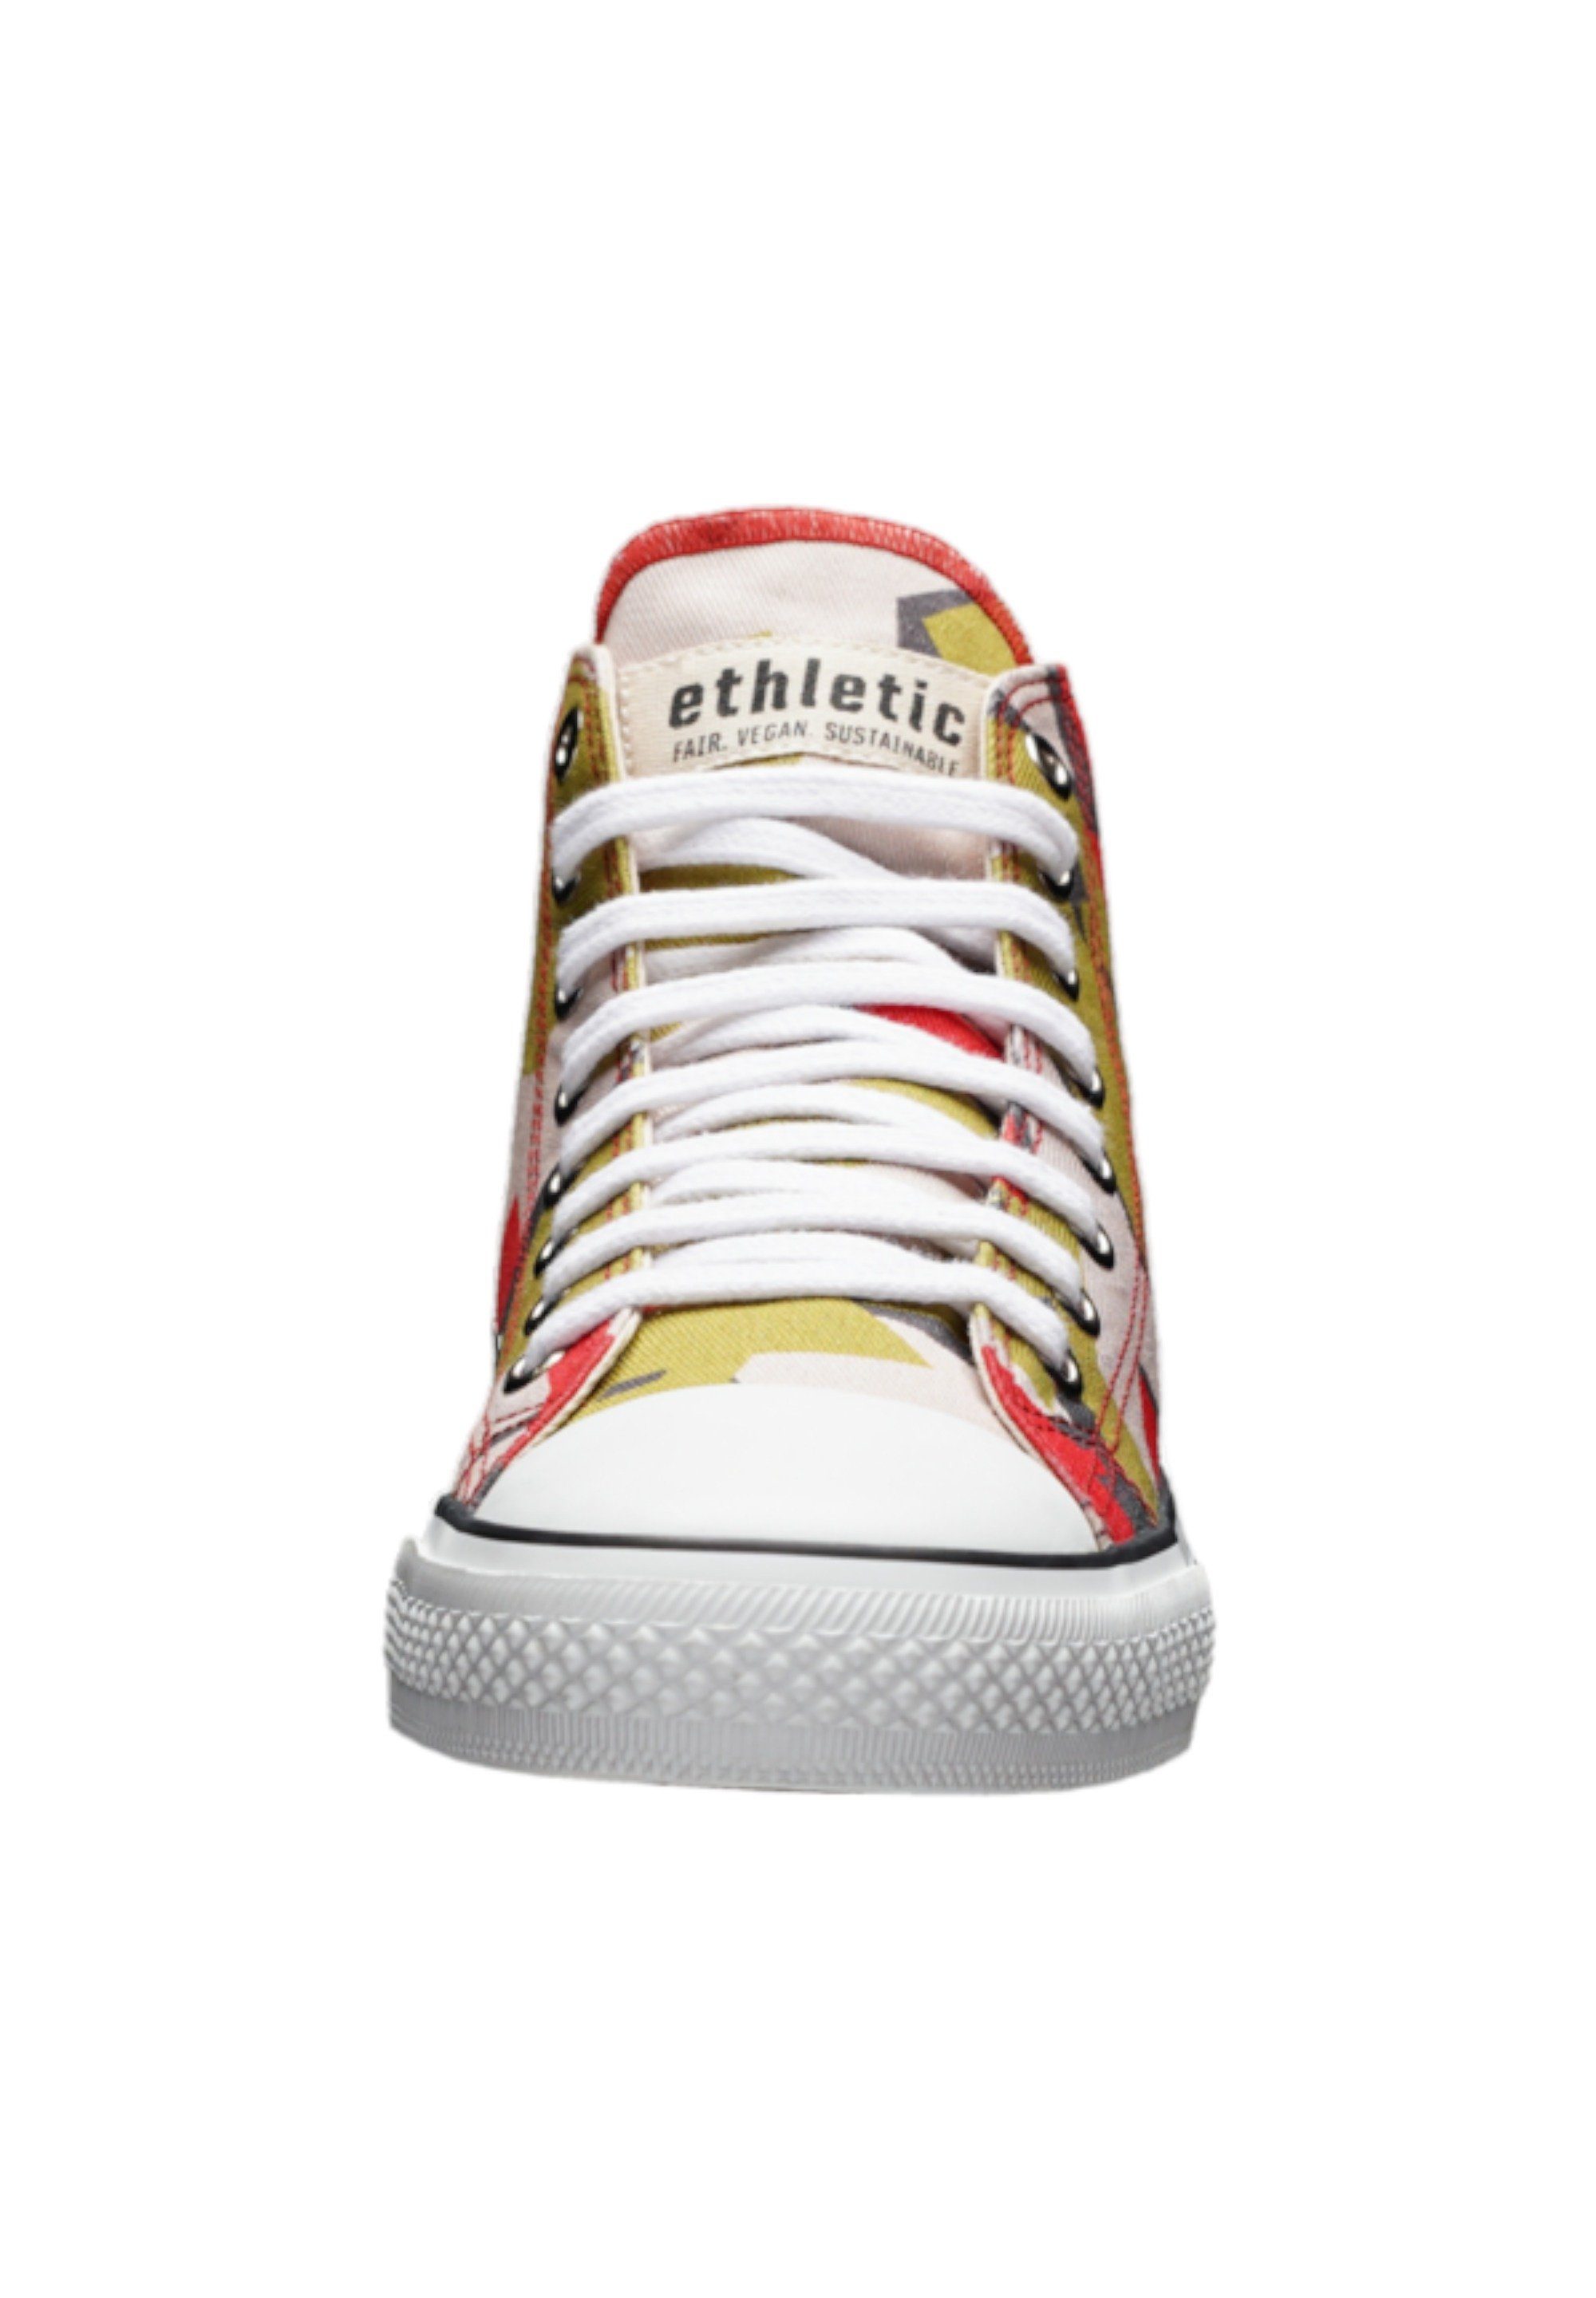 White Cap Hi ETHLETIC Red Sneaker Produkt Just Fairtrade - Camou White Cut